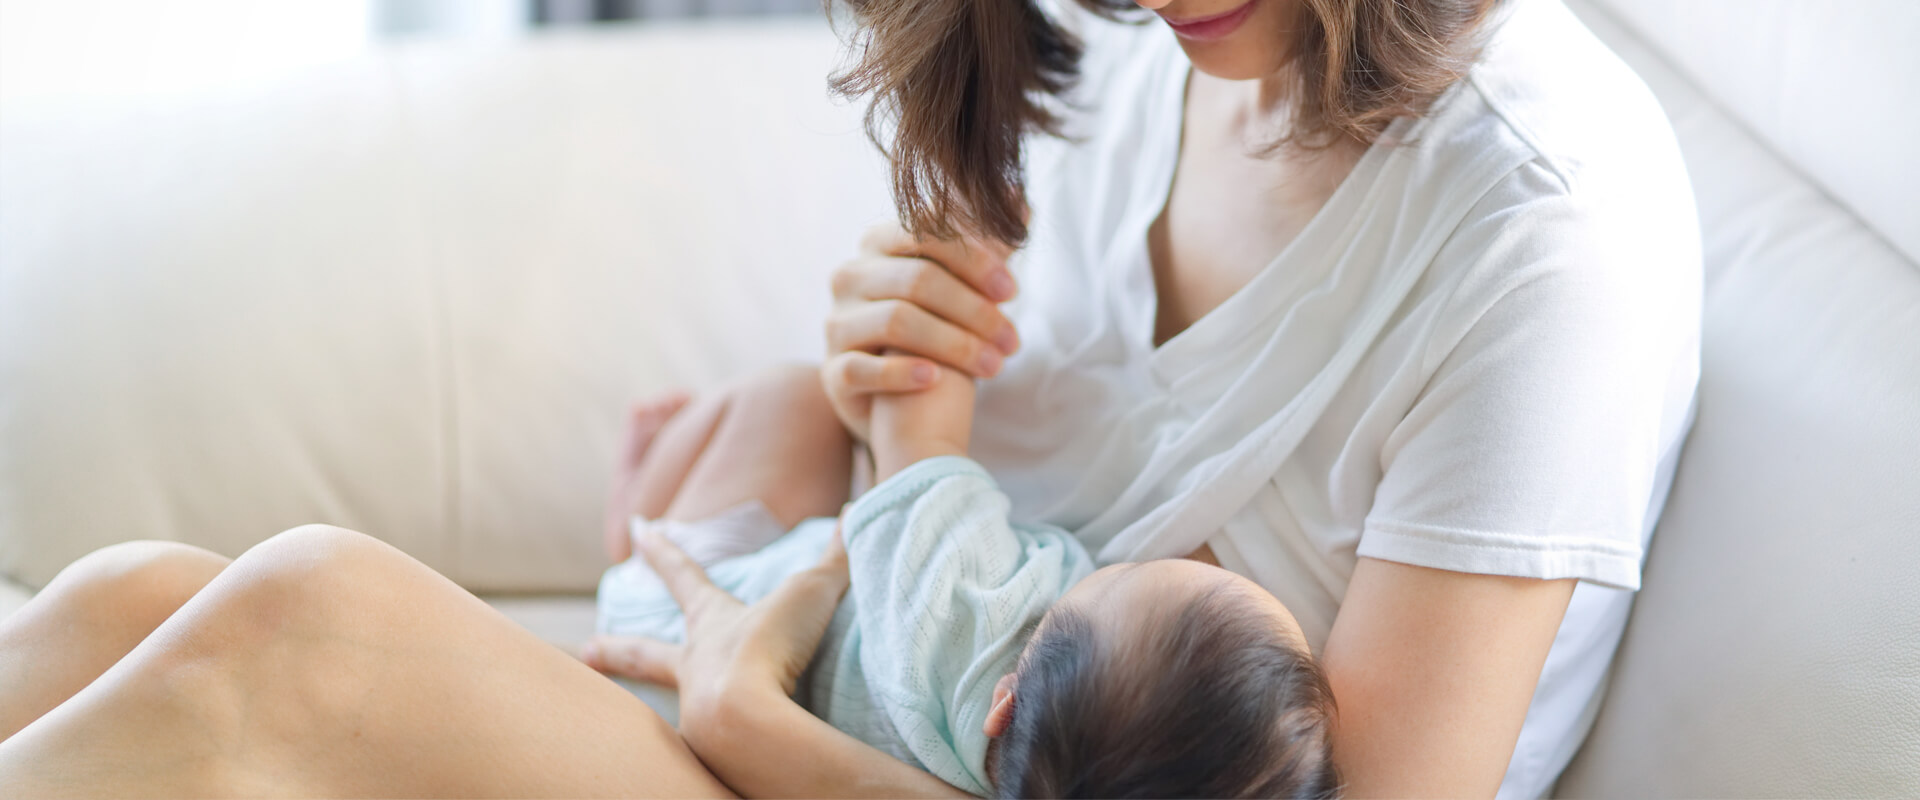 MOMS KNOW BREAST HOW TO BREASTFEED SAFELY IN THE TIME OF PANDEMIC